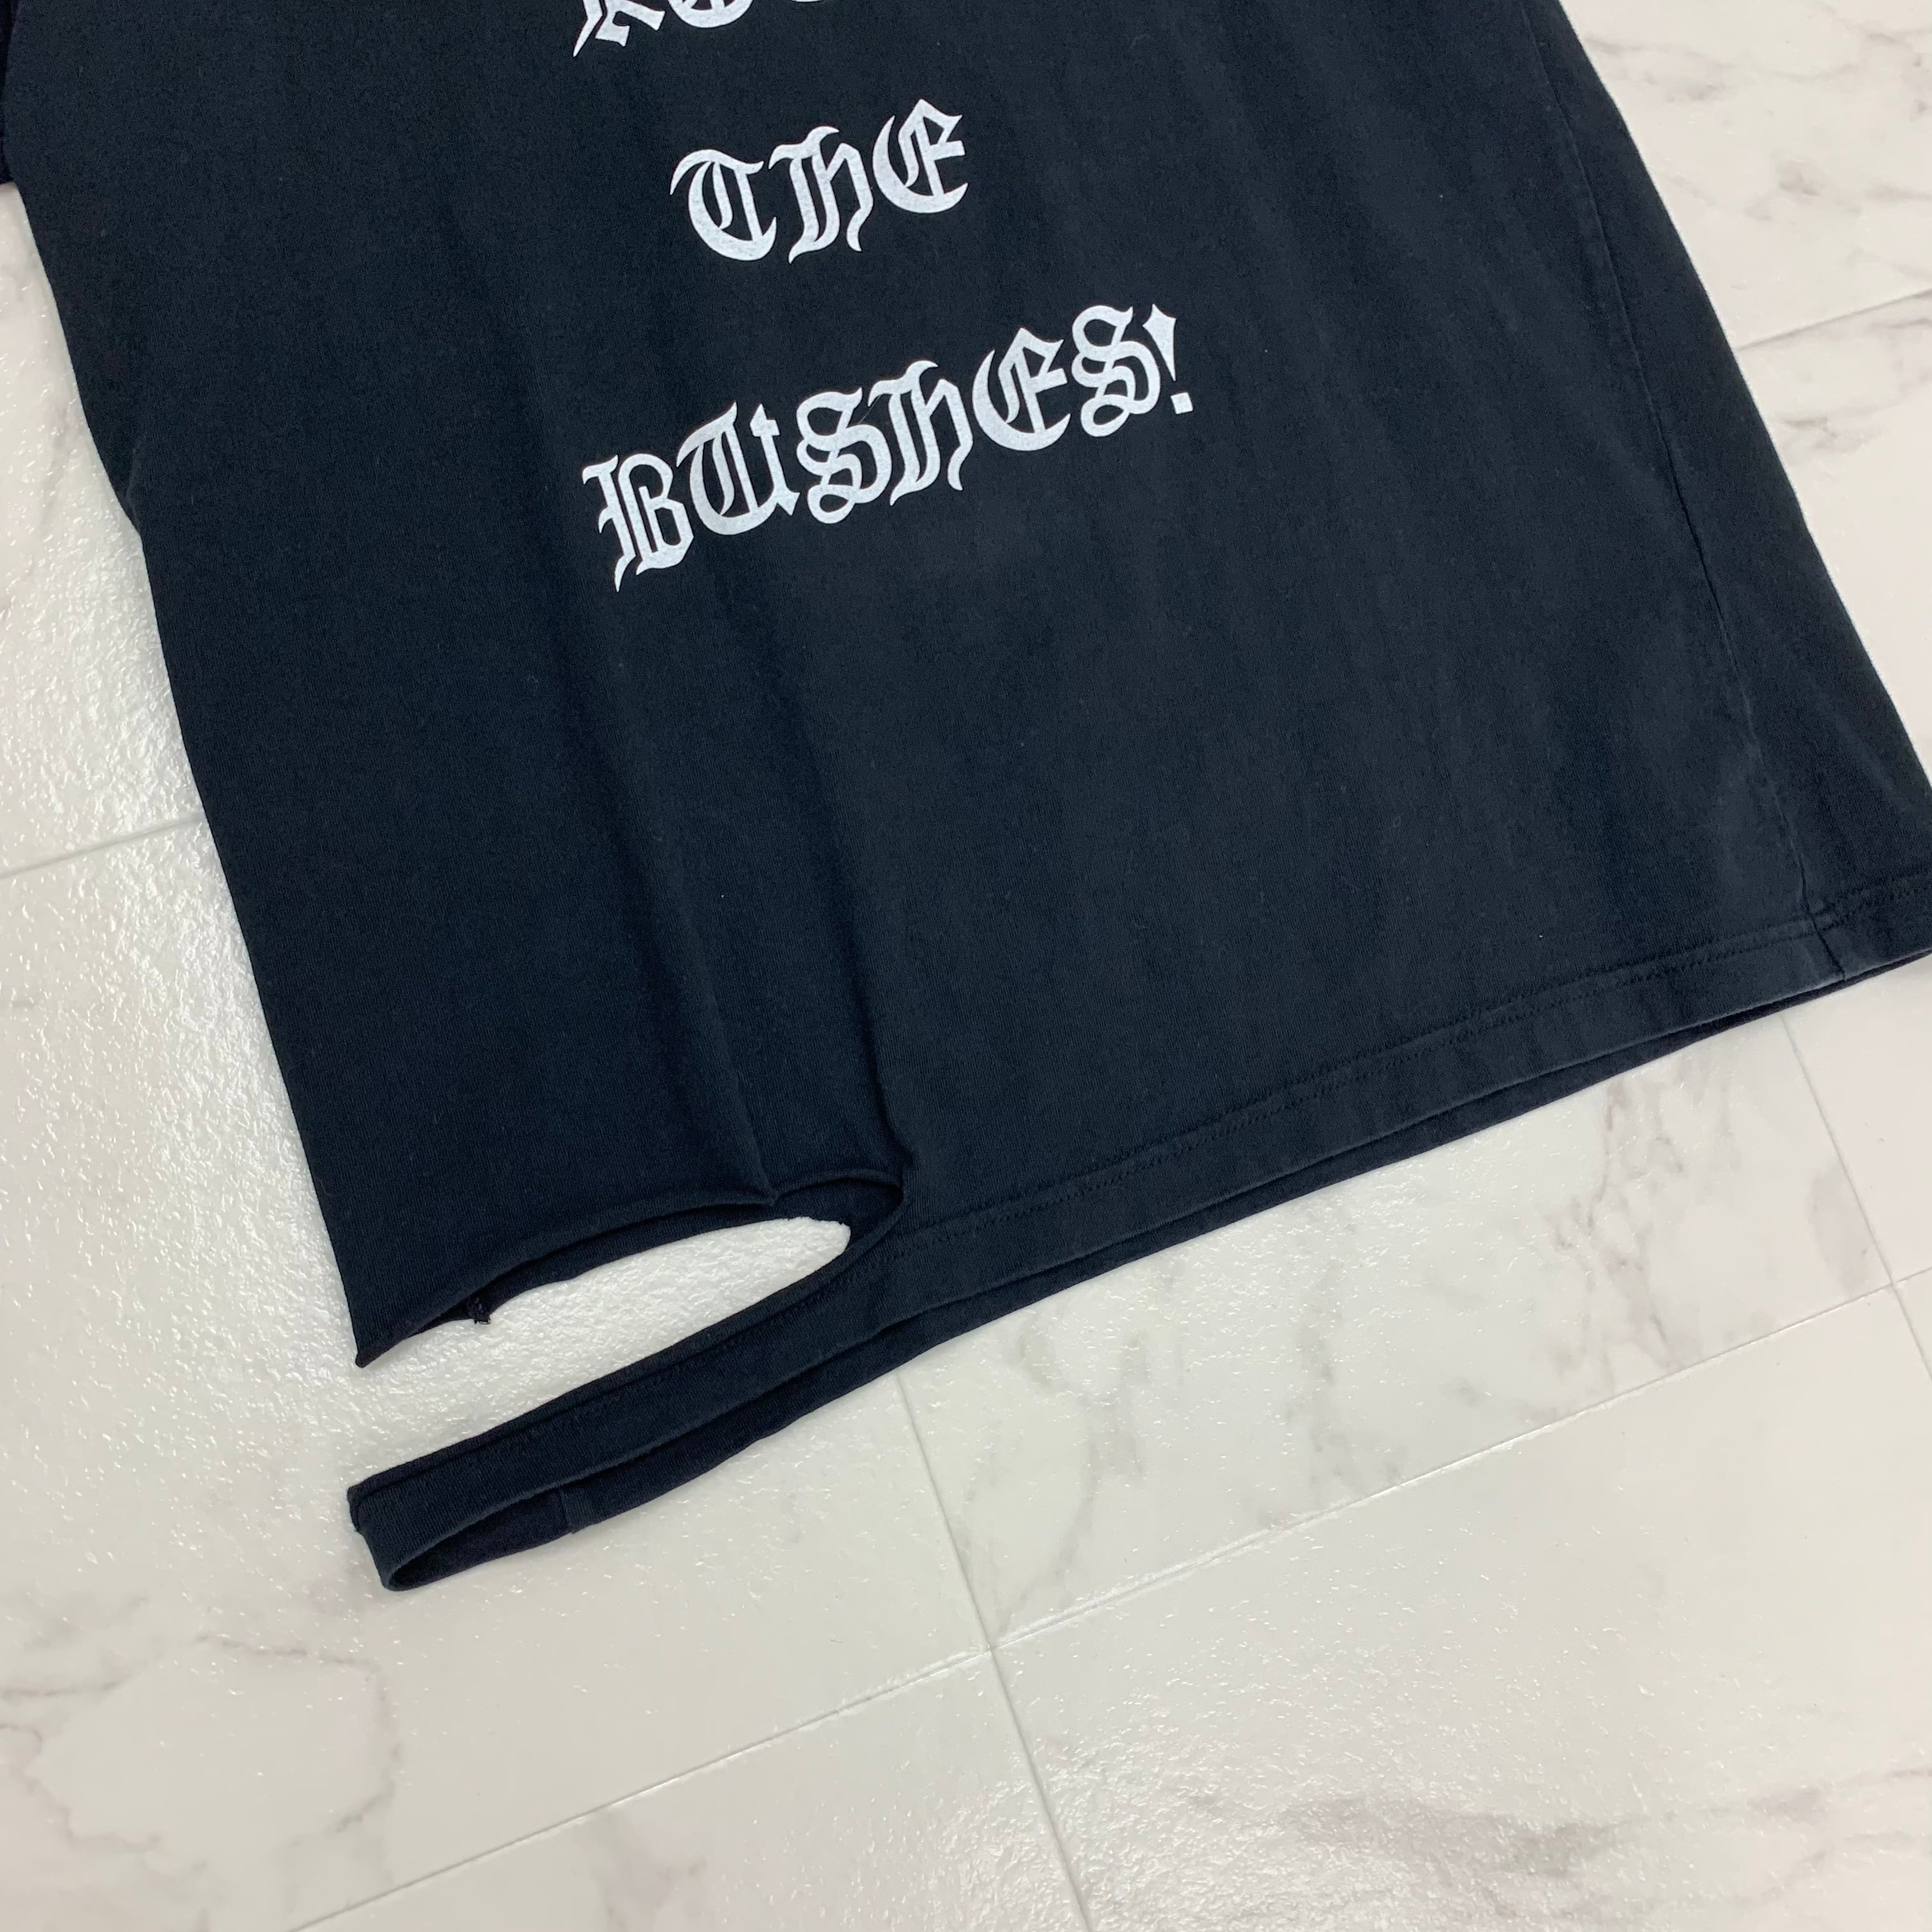 number (n)ine  04aw give期 反戦 Tシャツ